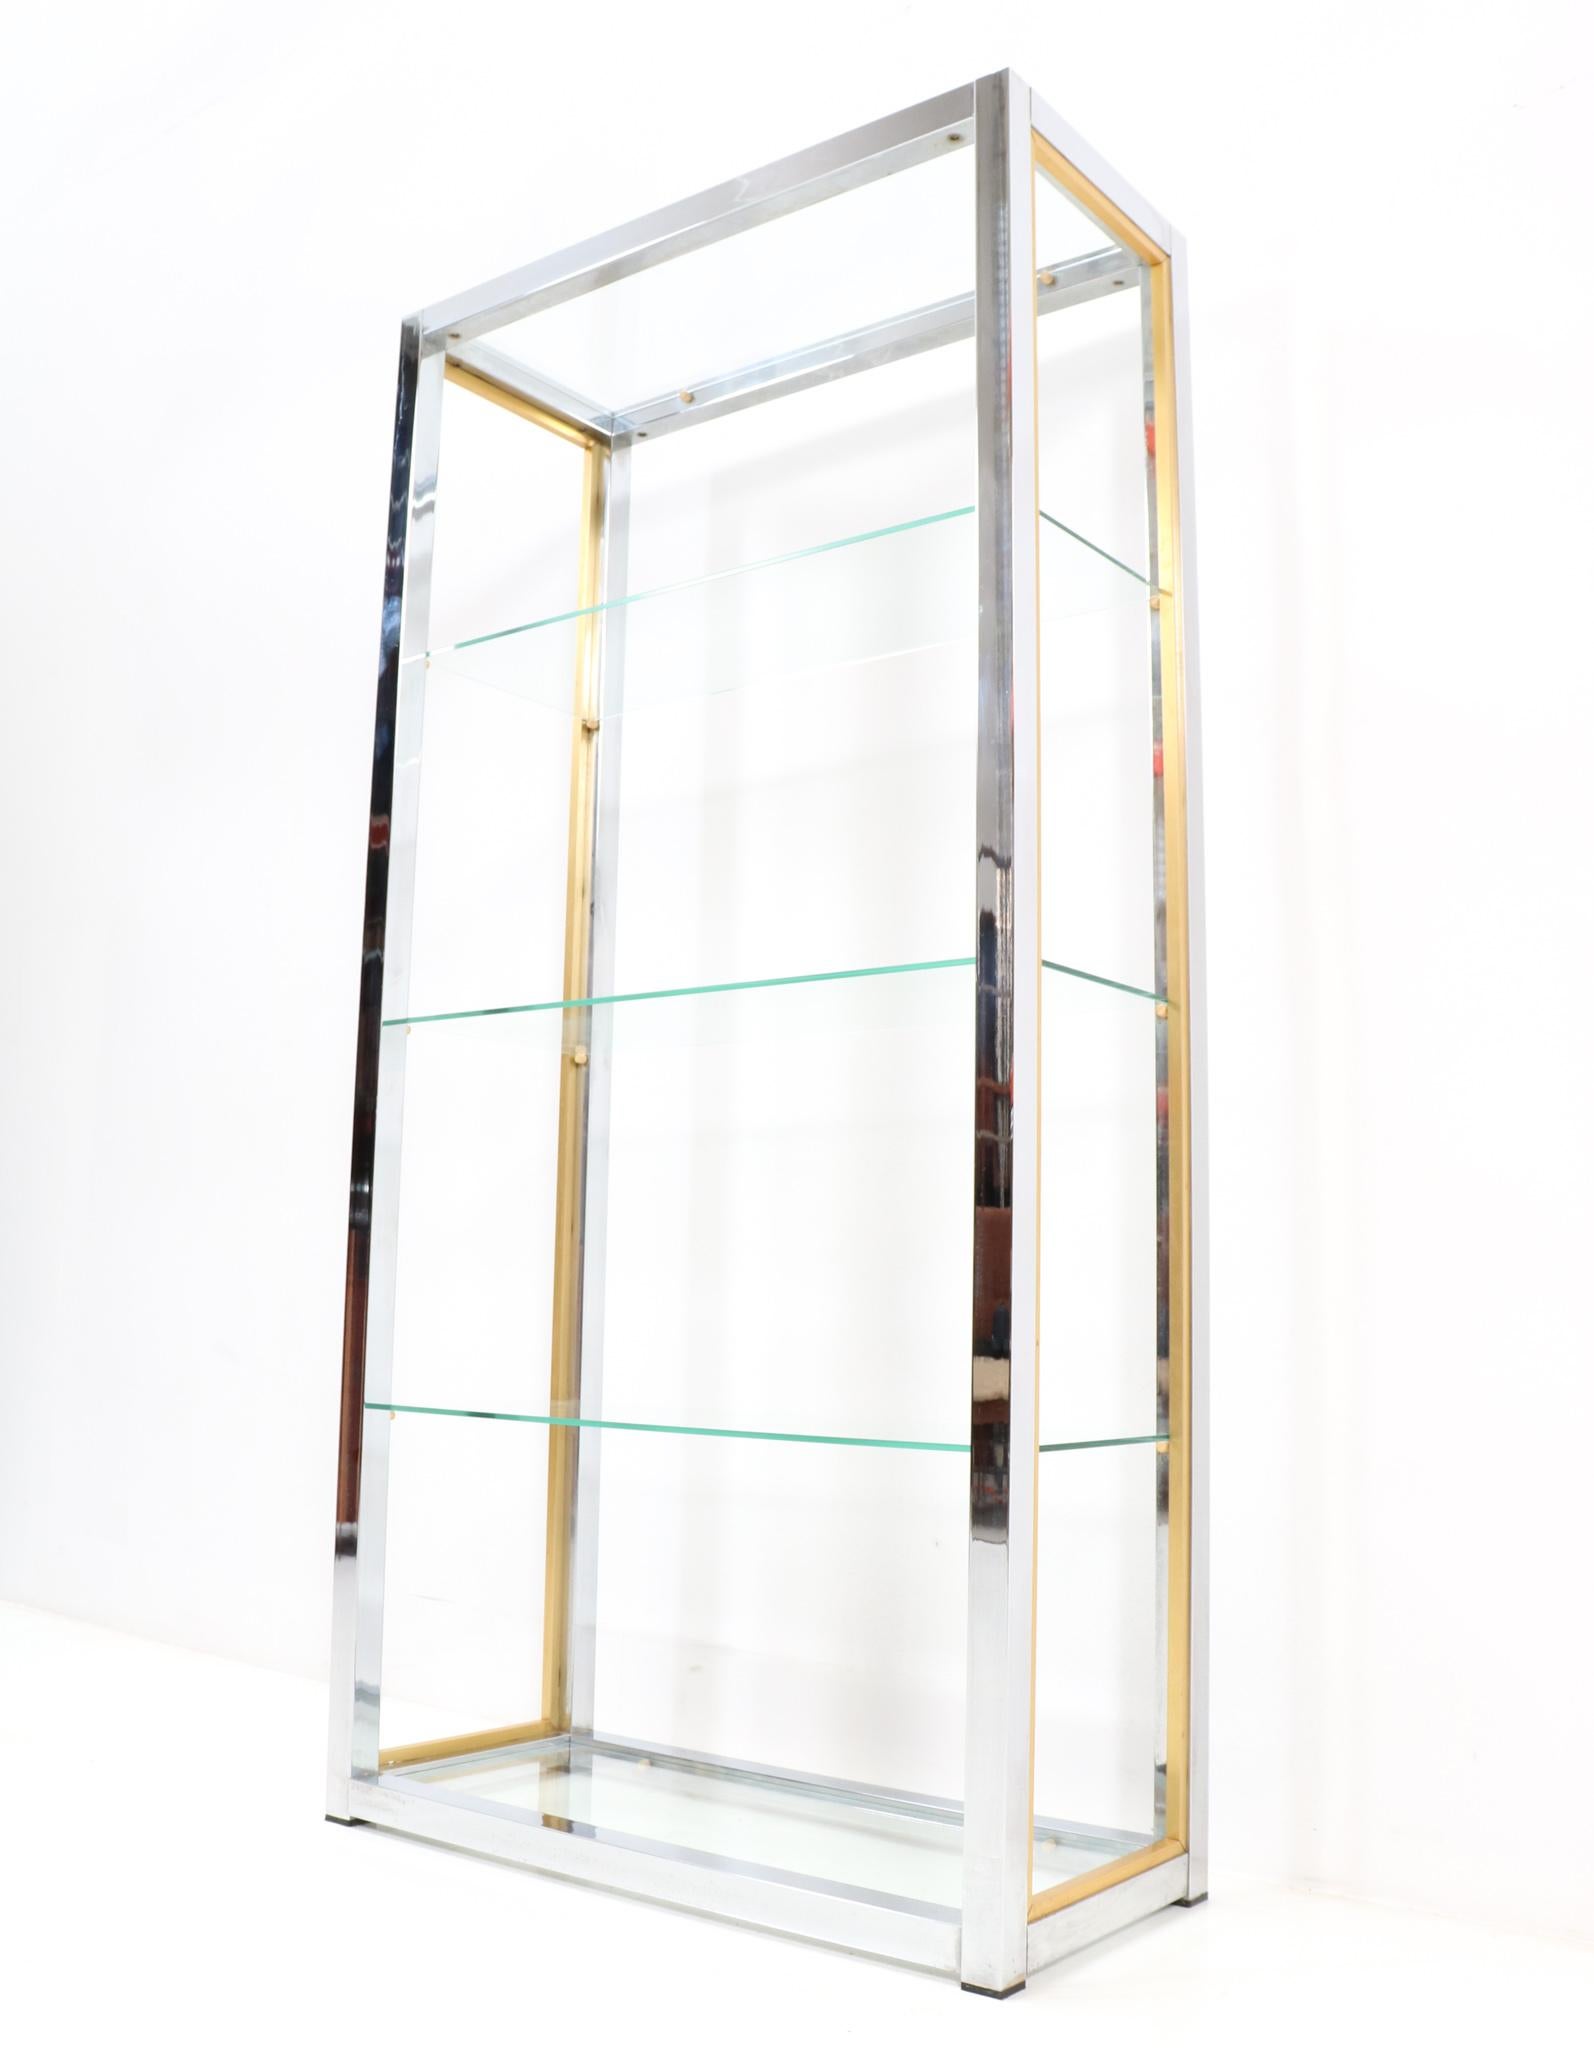 Late 20th Century Hollywood Regency Italian Chrome and Brass Etagere by Renato Zevi, 1970s For Sale